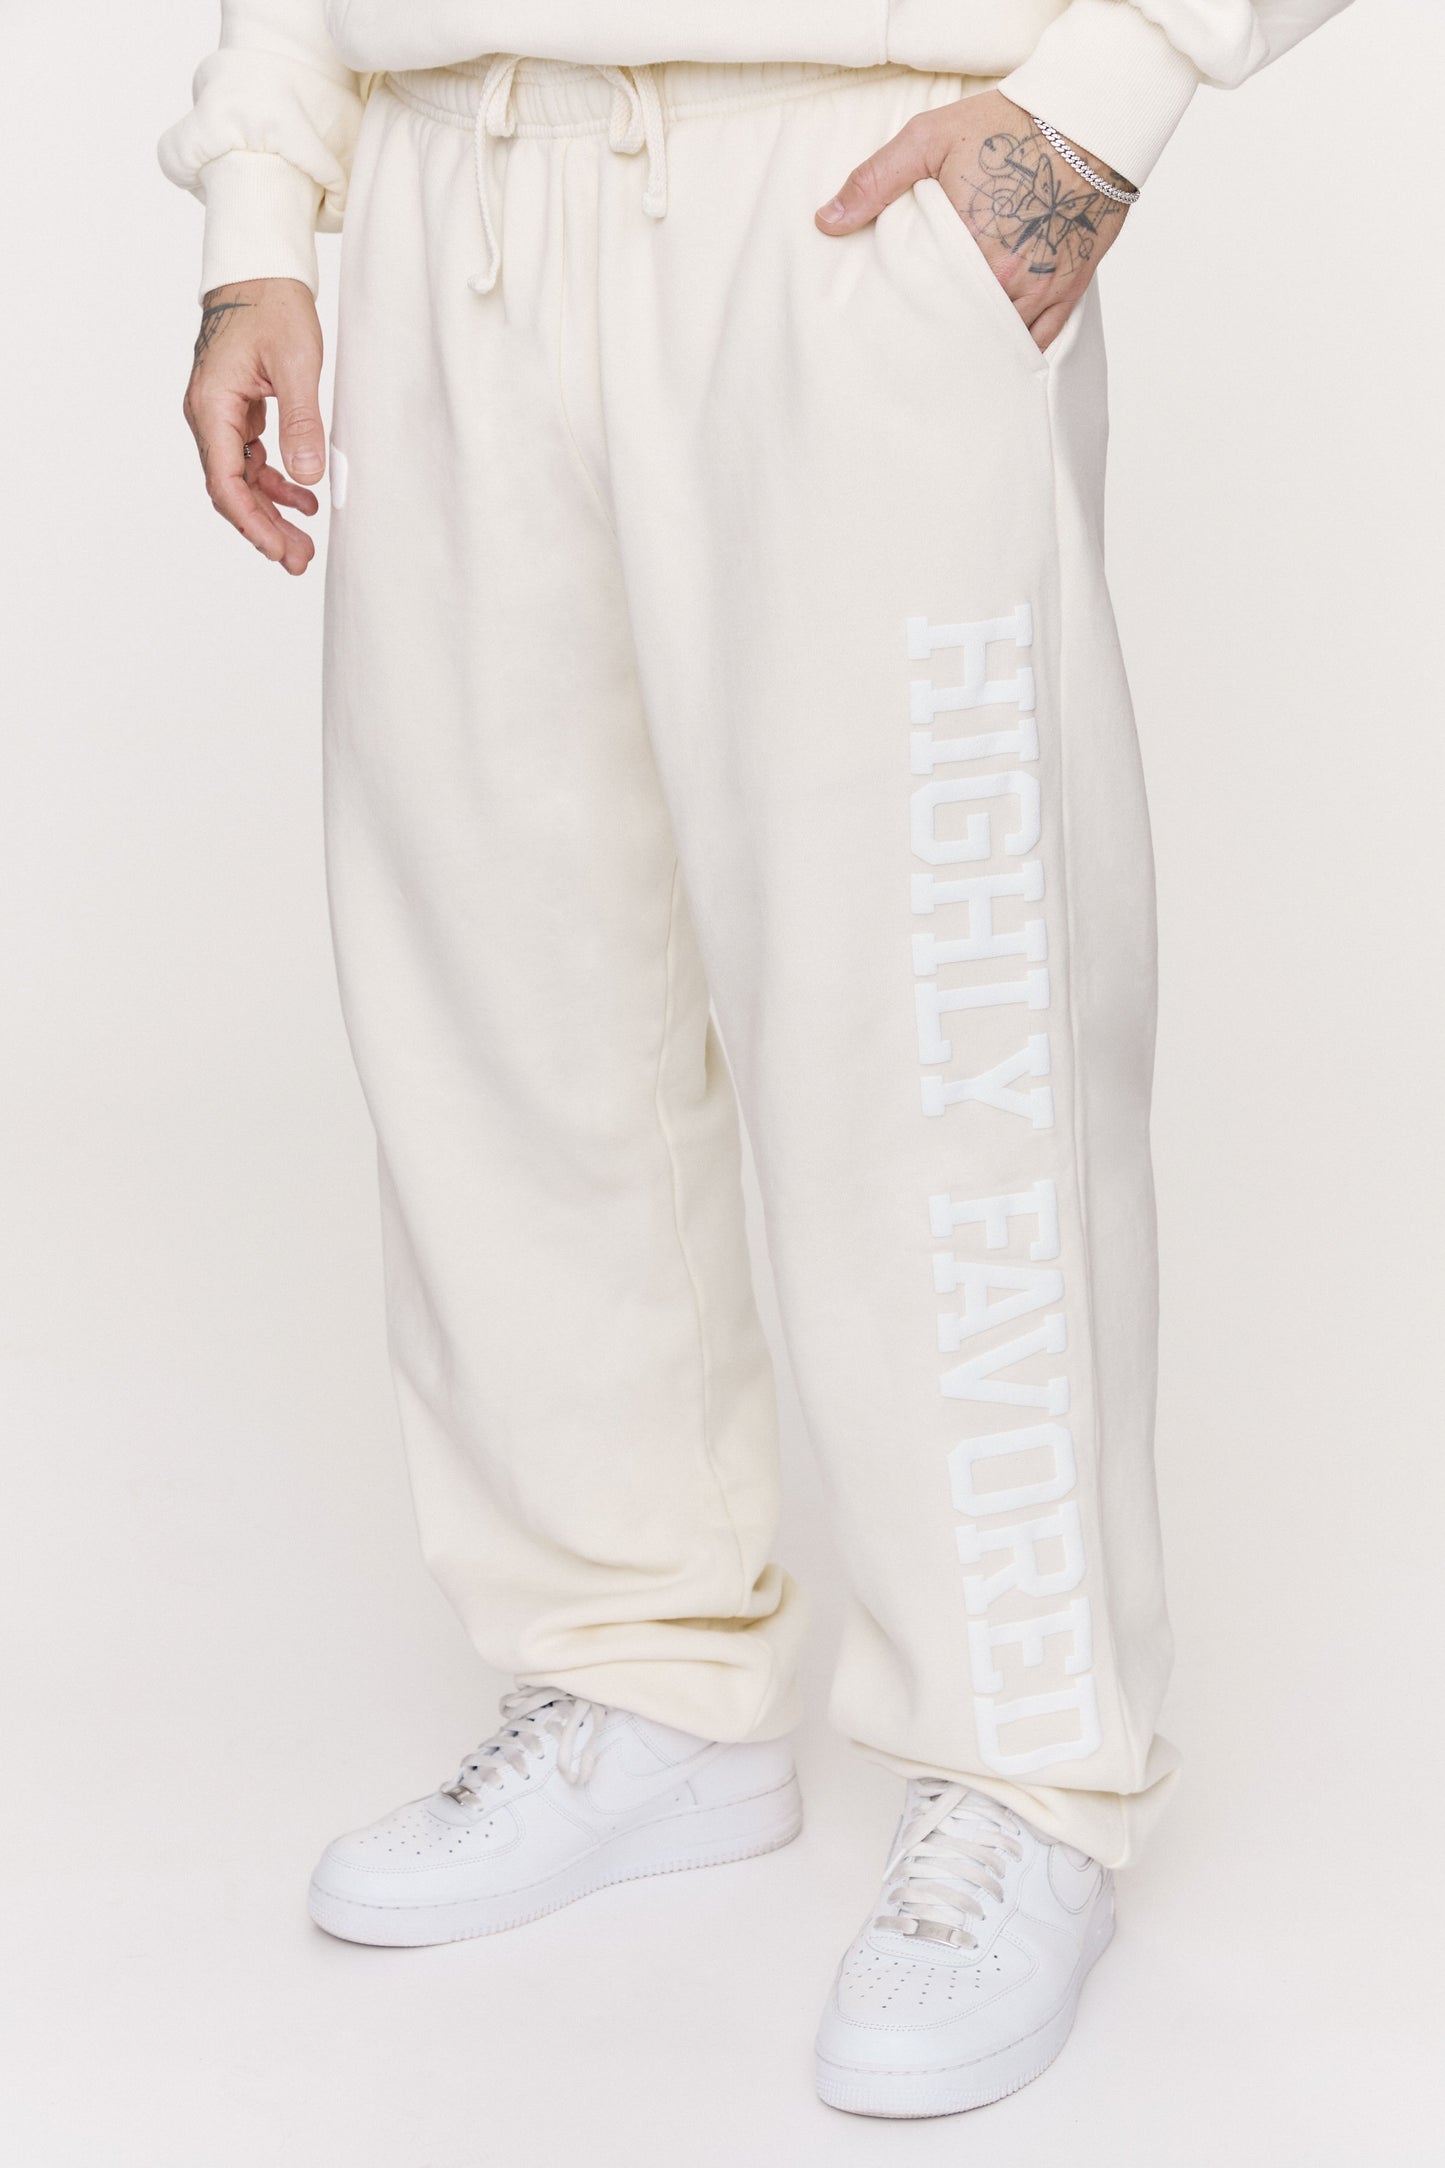 Highly Favored Sweatpants (Cream)